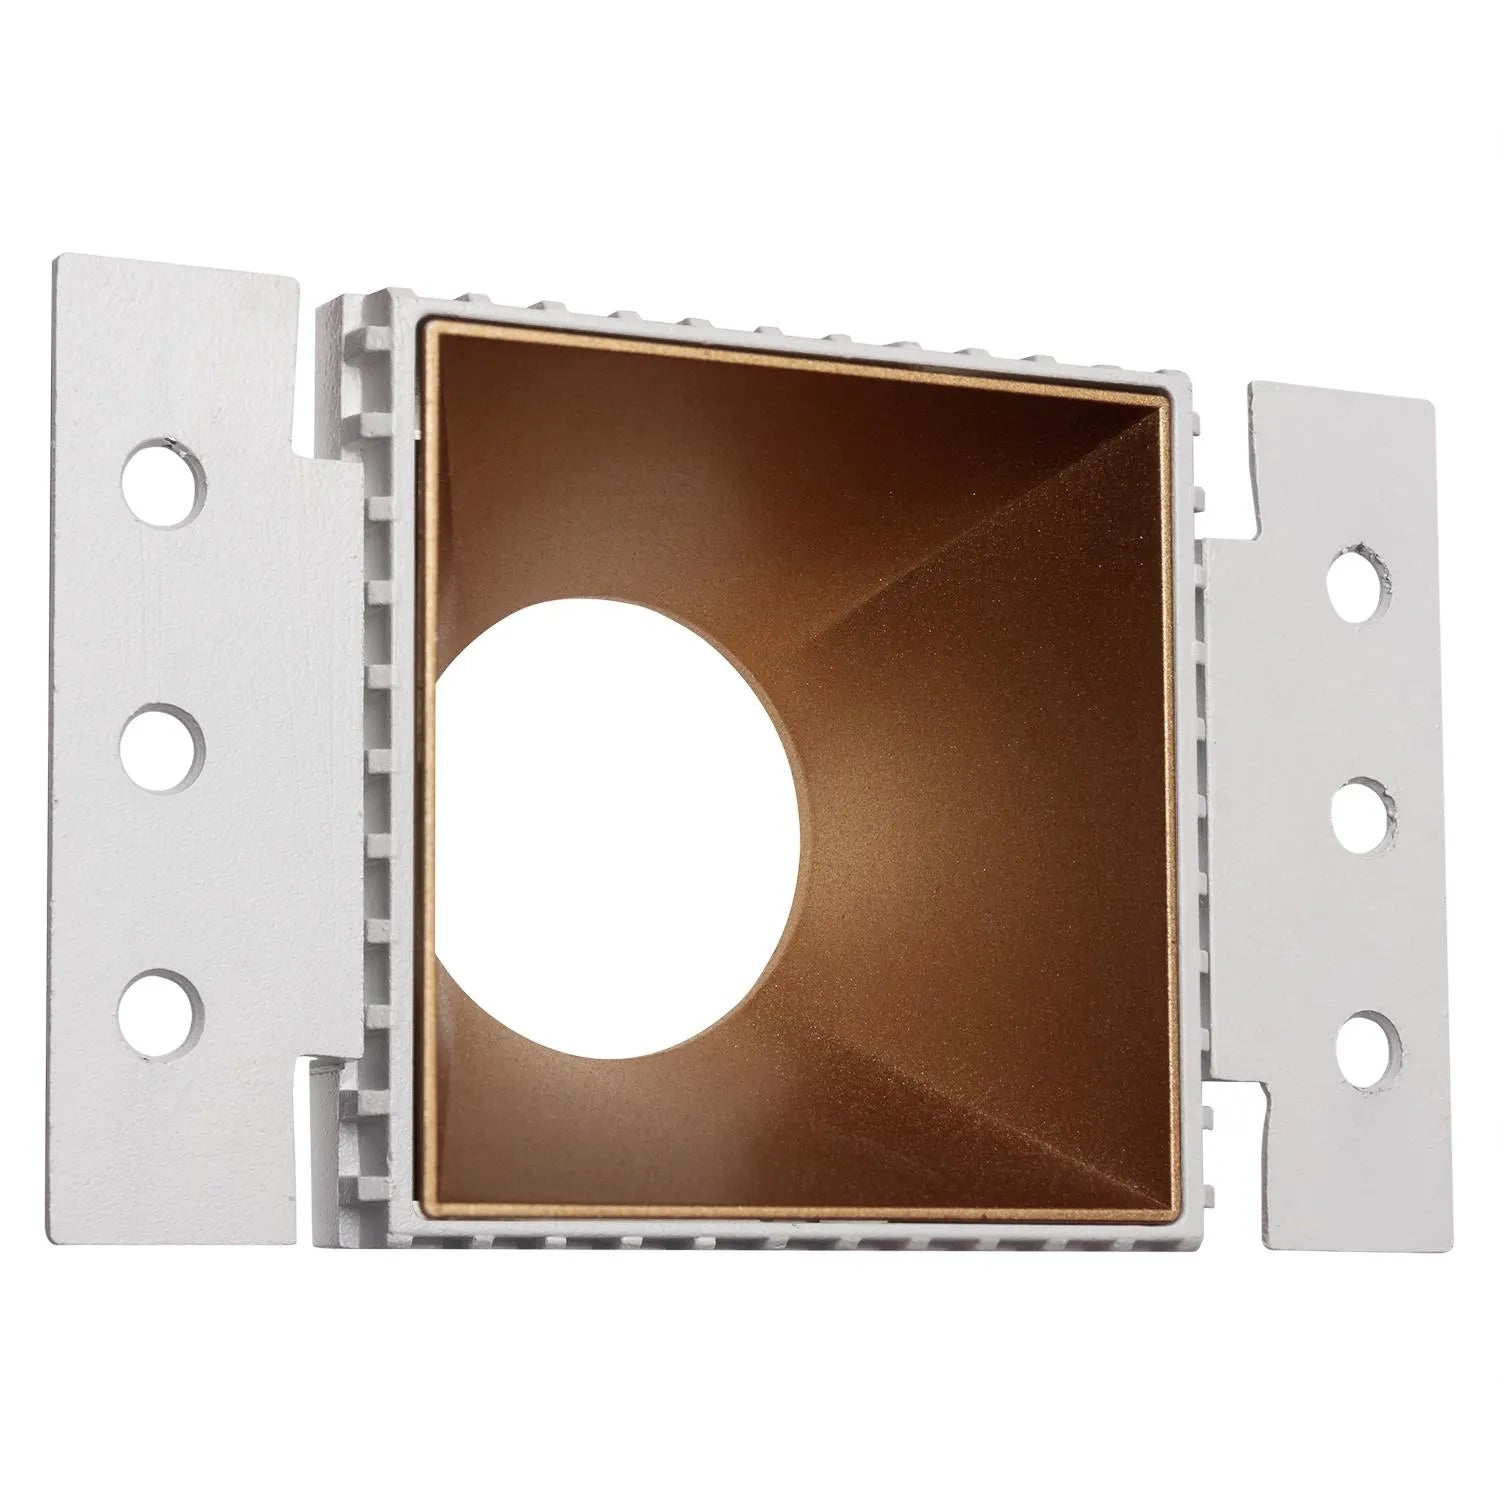 Westgate LRD-TL-10W-40K-4S-MG LED 4" Round Architectural Trimless Recessed Light Residential Lighting - Matte Gold